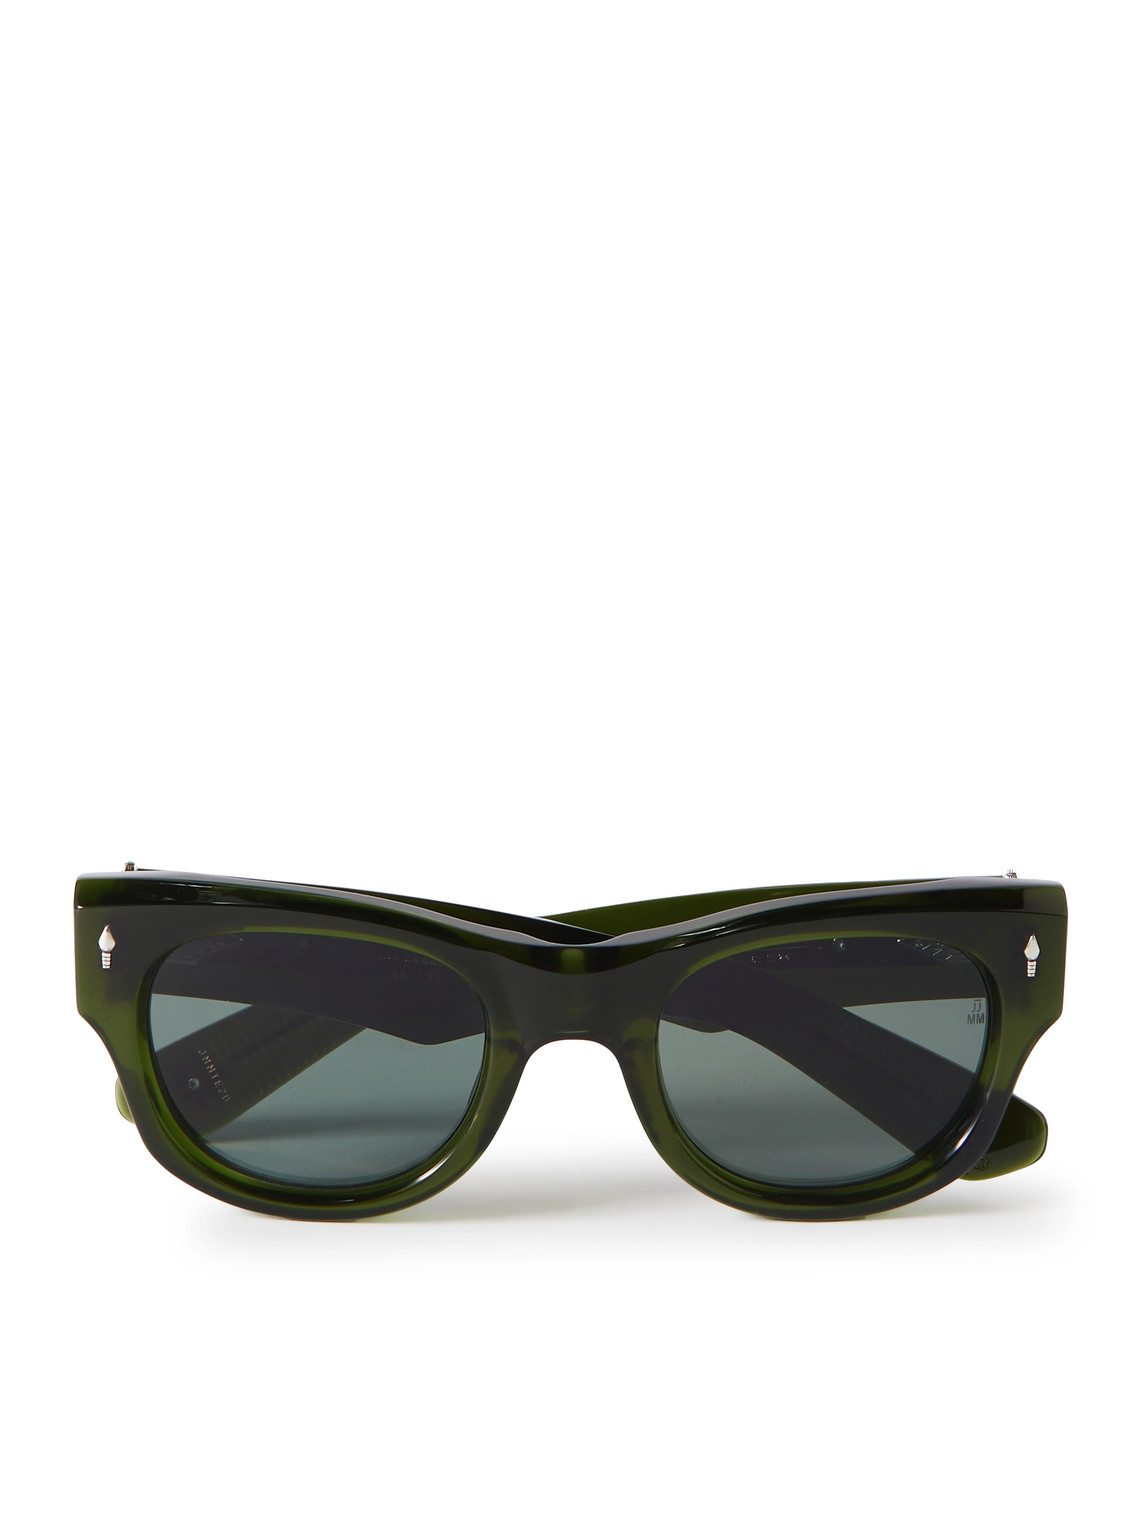 Jacques Marie Mage Truckee D-frame Acetate Sunglasses In Green